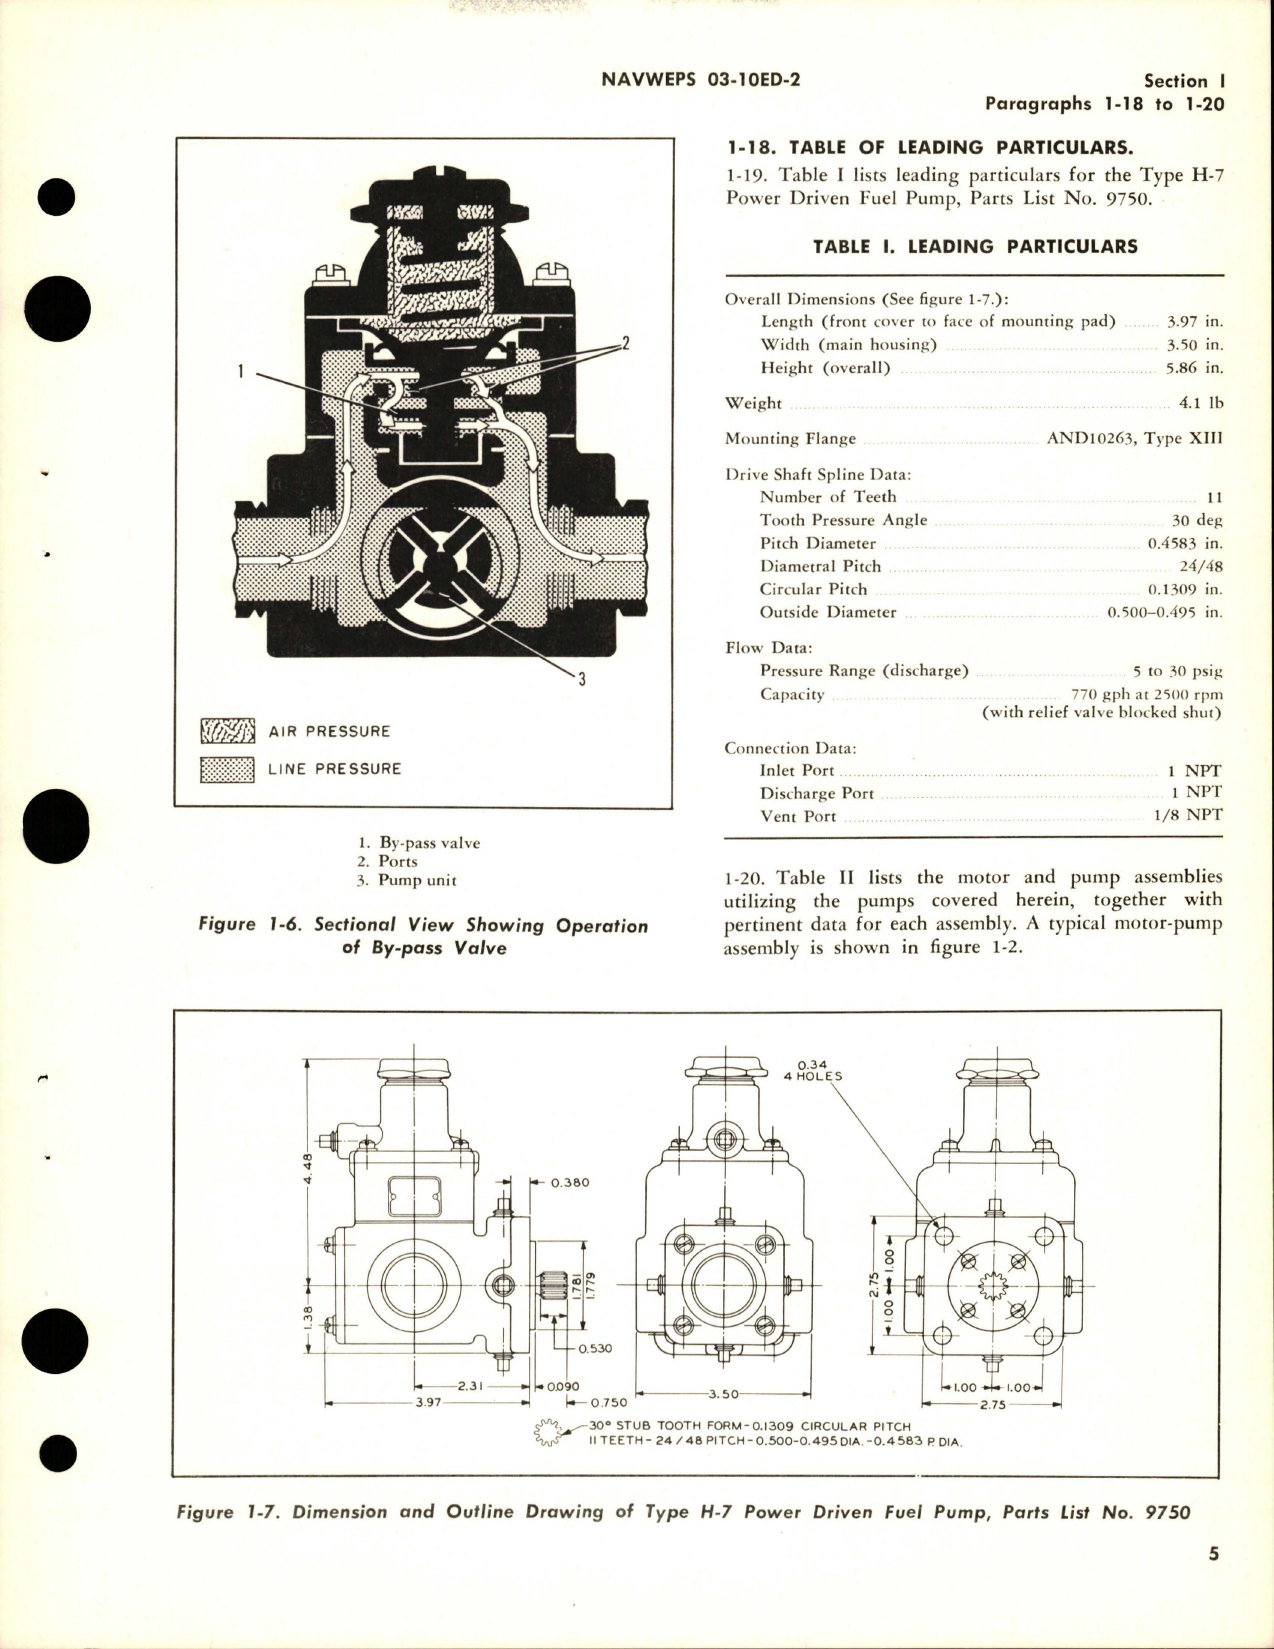 Sample page 9 from AirCorps Library document: Overhaul Instructions for Fuel and Water Pumps - Types F-10, H-2, H-4 and H-7